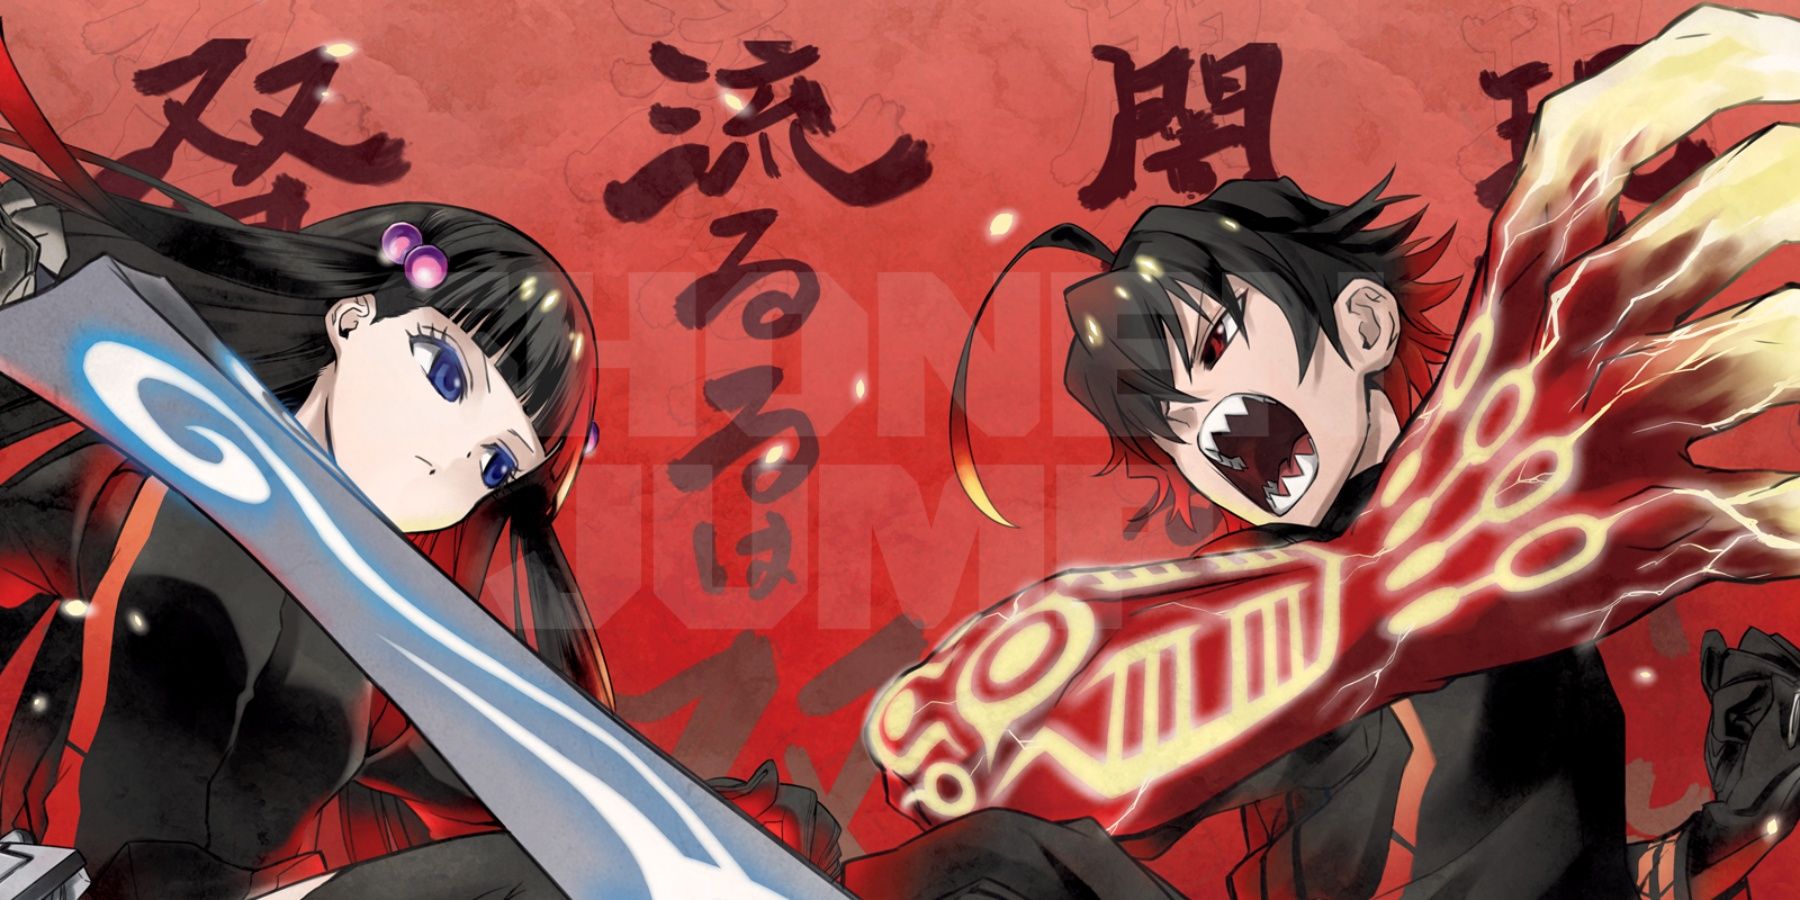 Devils' Line Anime Tells the Truth About Vampires on Home Video